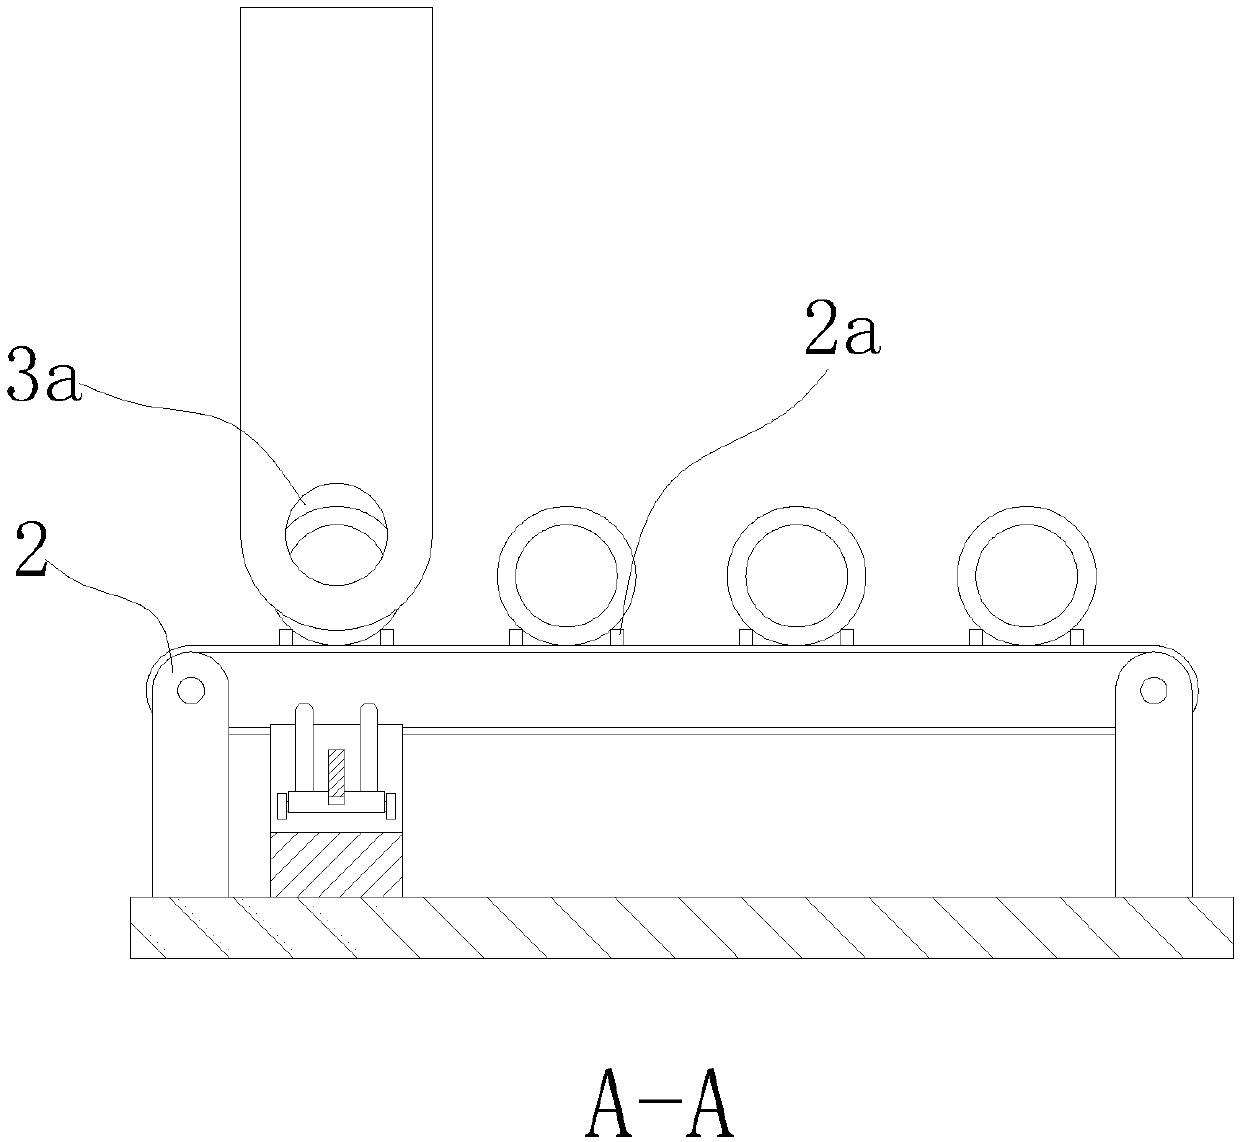 A continuous automatic press-fitting device for idlers and flanging bearing seats